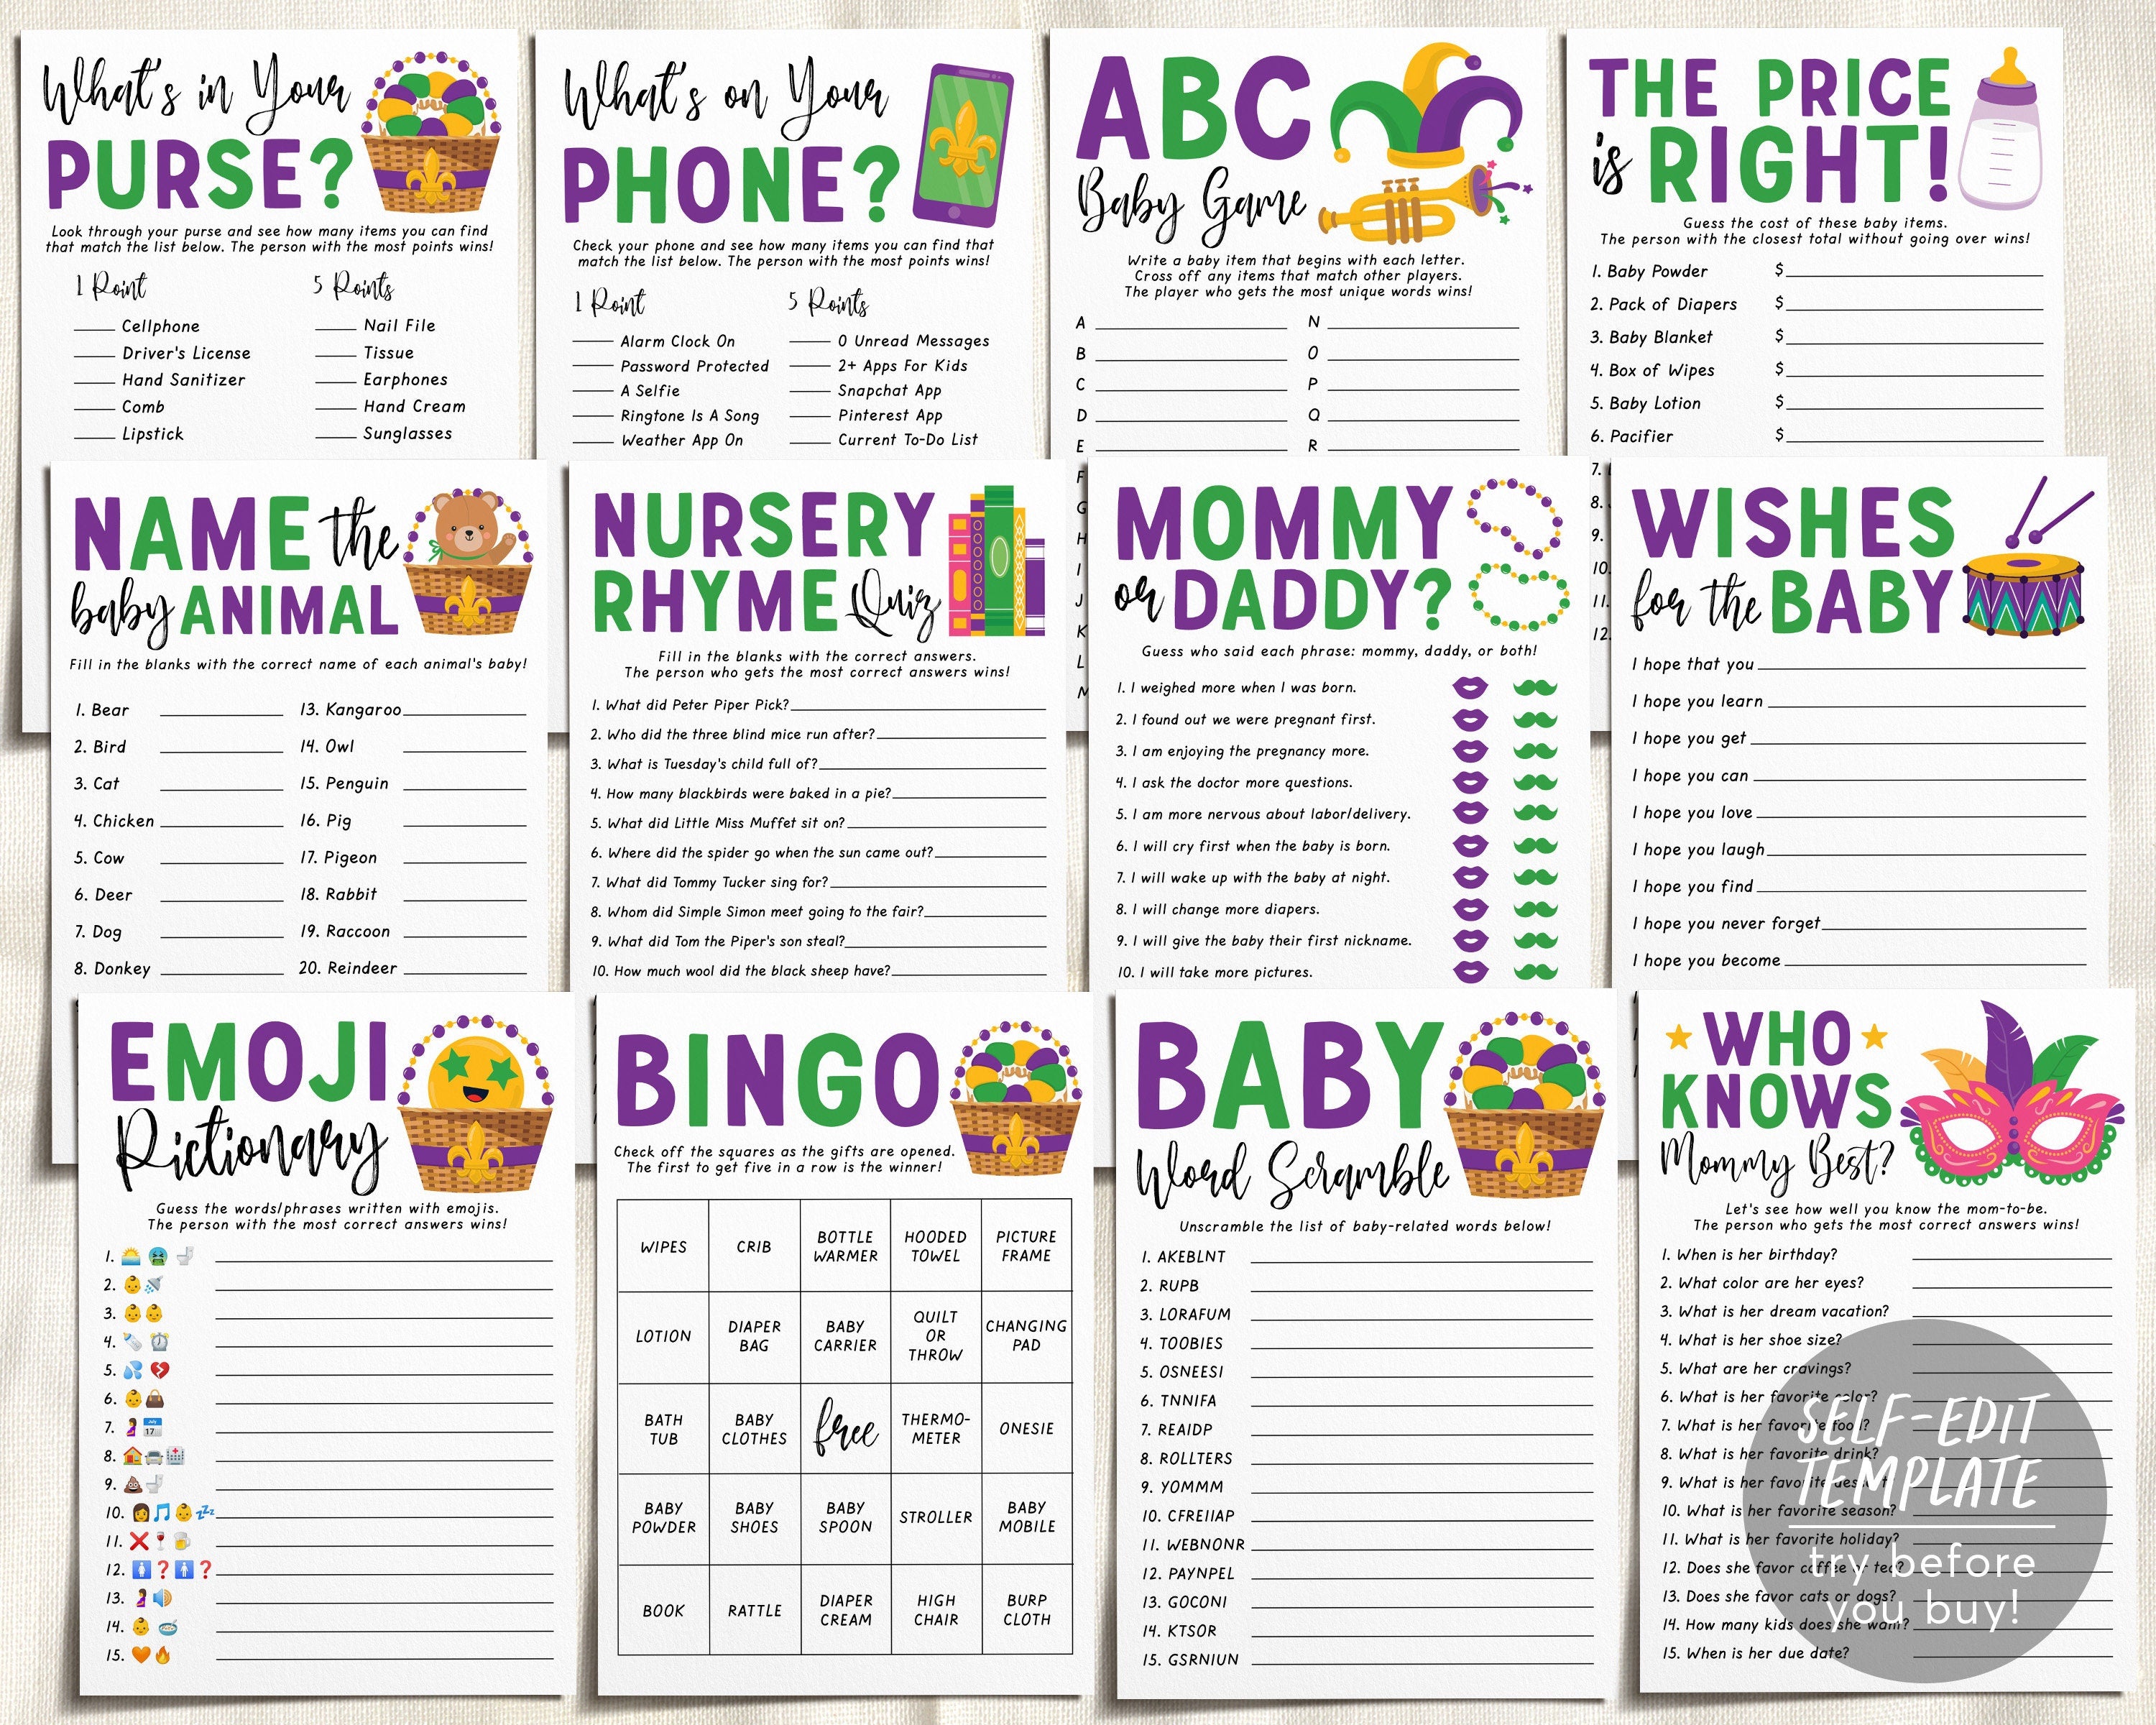 What's In Your Purse Bridal Shower Game Printable – Droo & Aya